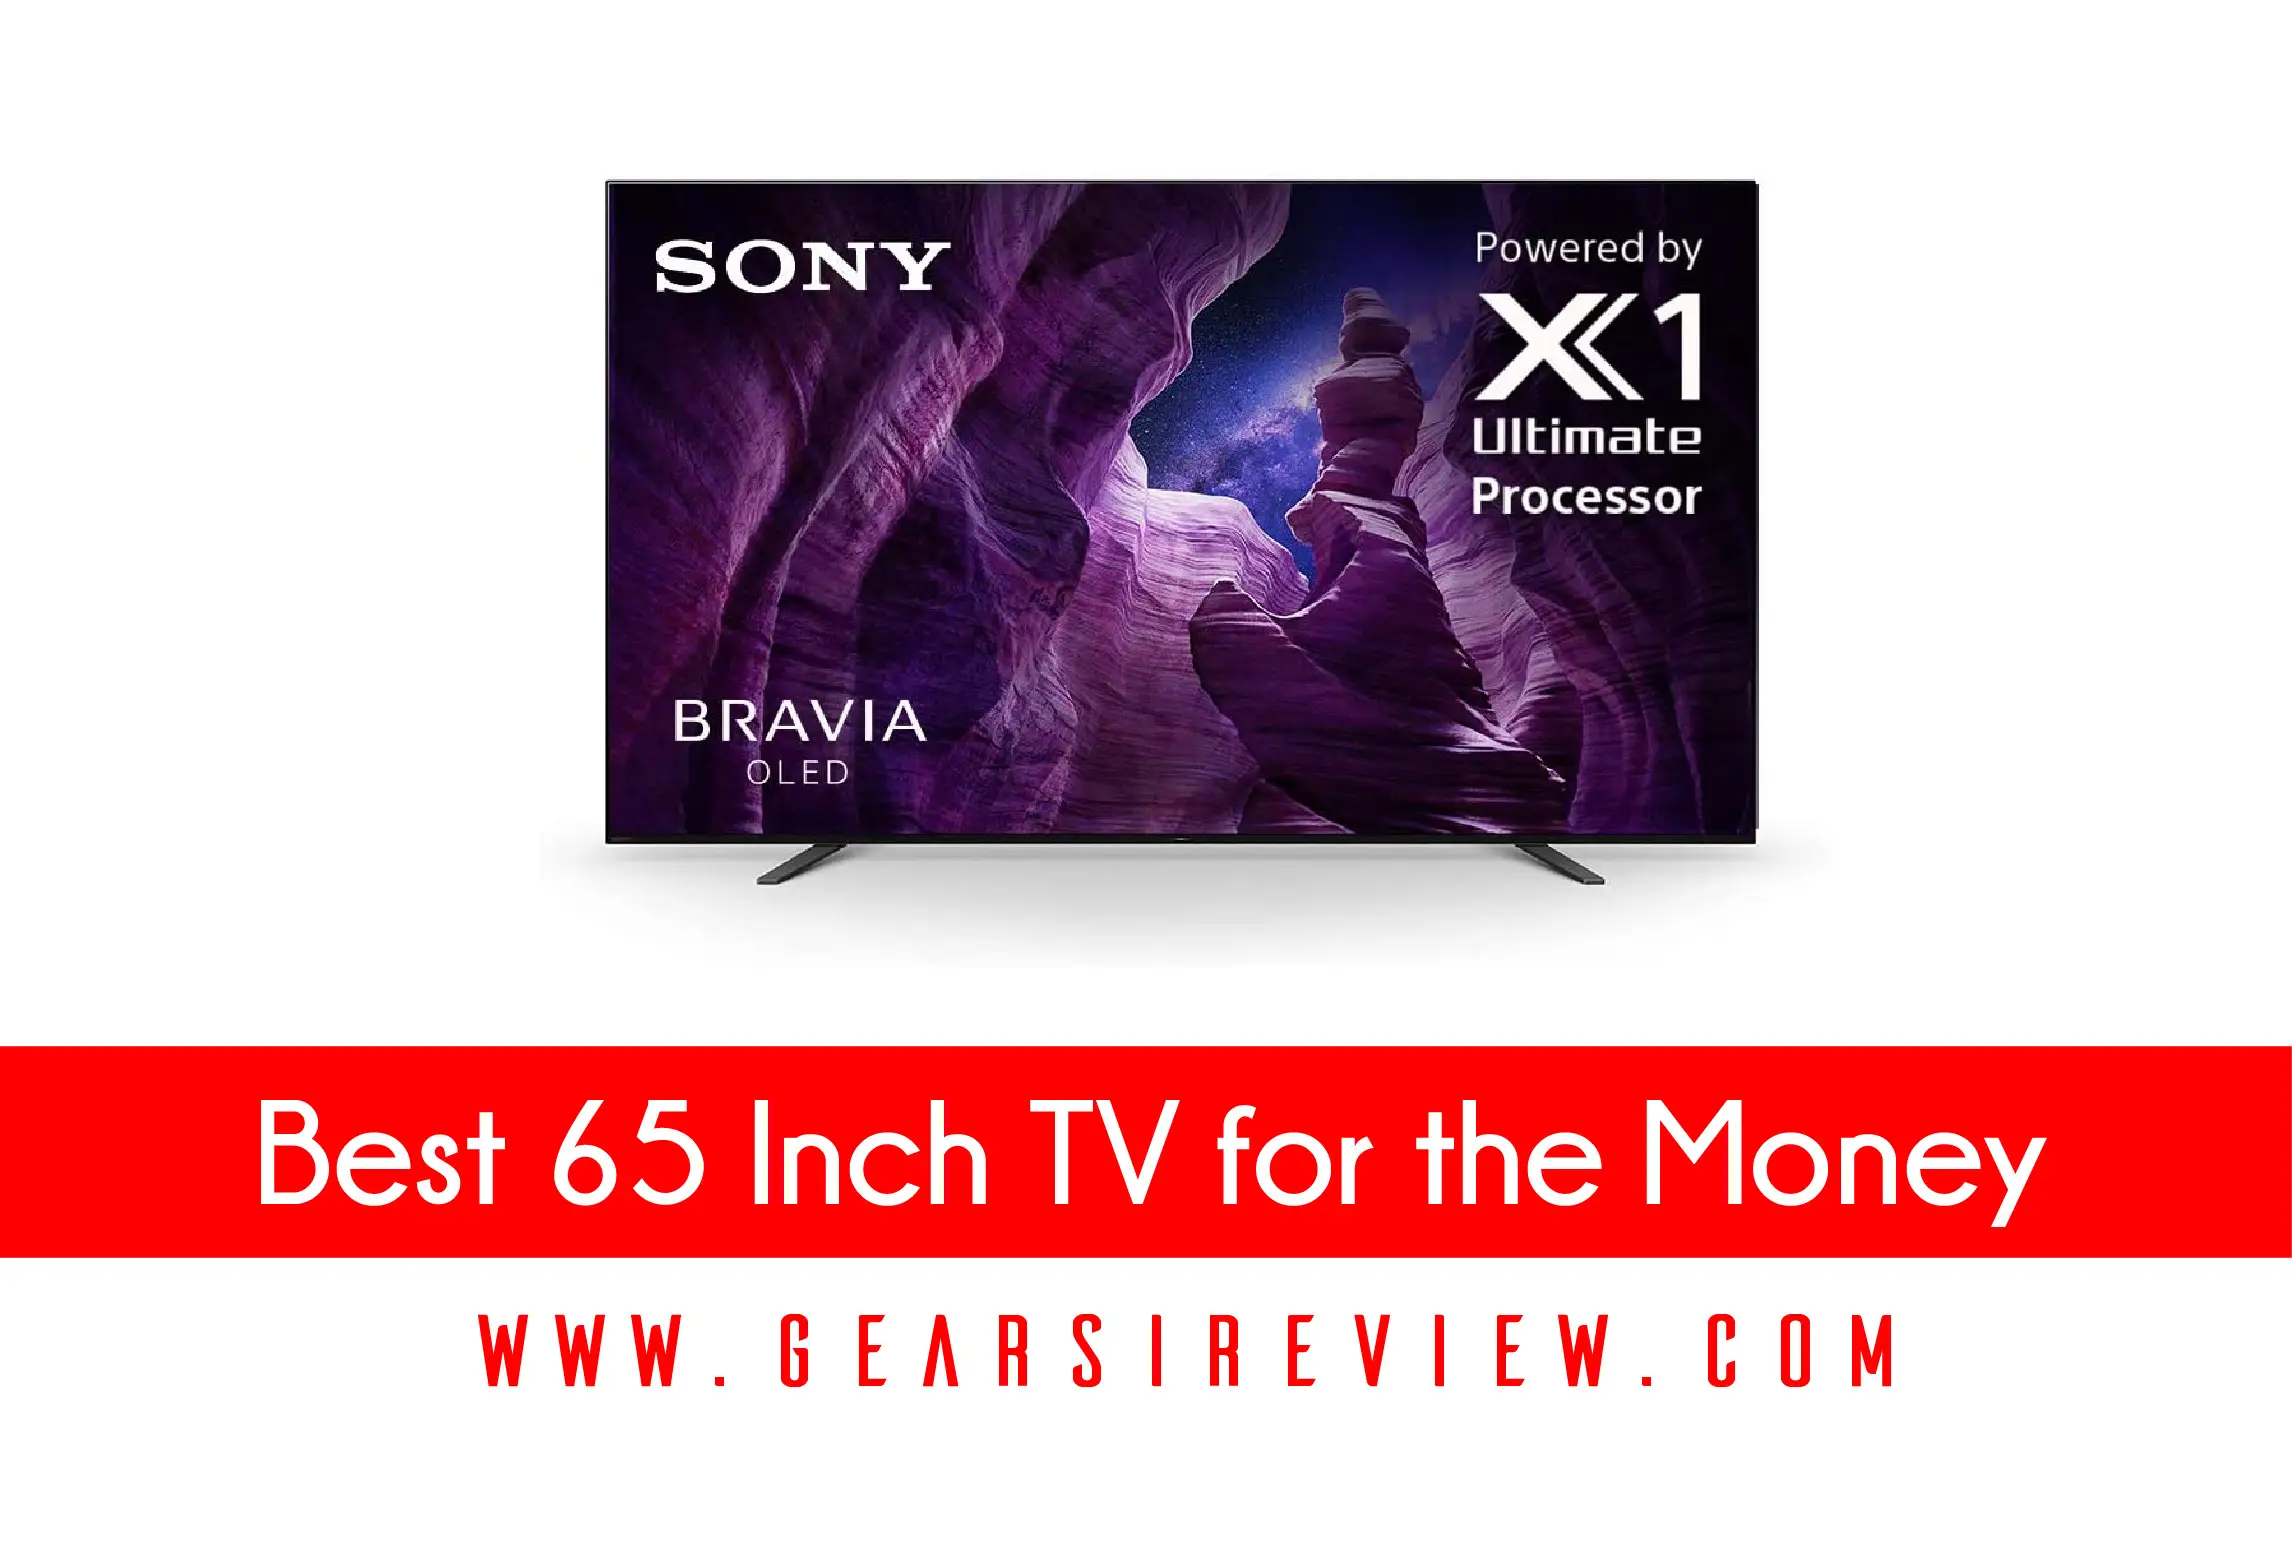 Best 65 Inch TV for the Money